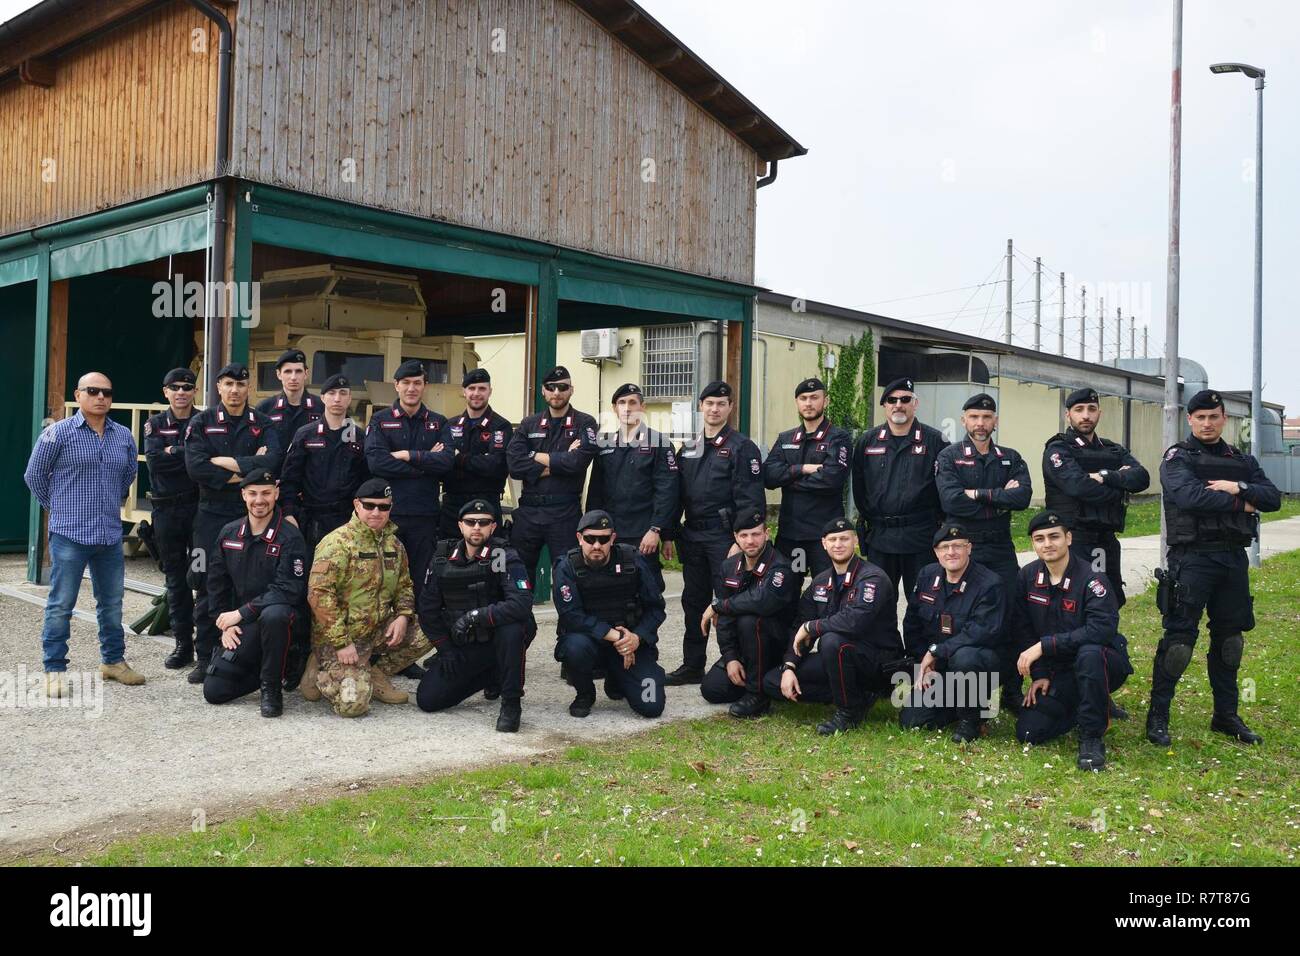 Italian Carabinieri of the 7th Regiment Carabinieri “Laives” Bolzano and 13th Regiment Carabinieri “Friuli Venezia Giulia” Gorizia, pose for a group photo, during the training at Caserma Ederle Vicenza, Italy, April 6, 2017. Carabinieri use U.S. Army RTSD South equipment to enhance the bilateral relations and to expand levels of cooperation and the capacity of the personnel involved in joint operations. Stock Photo